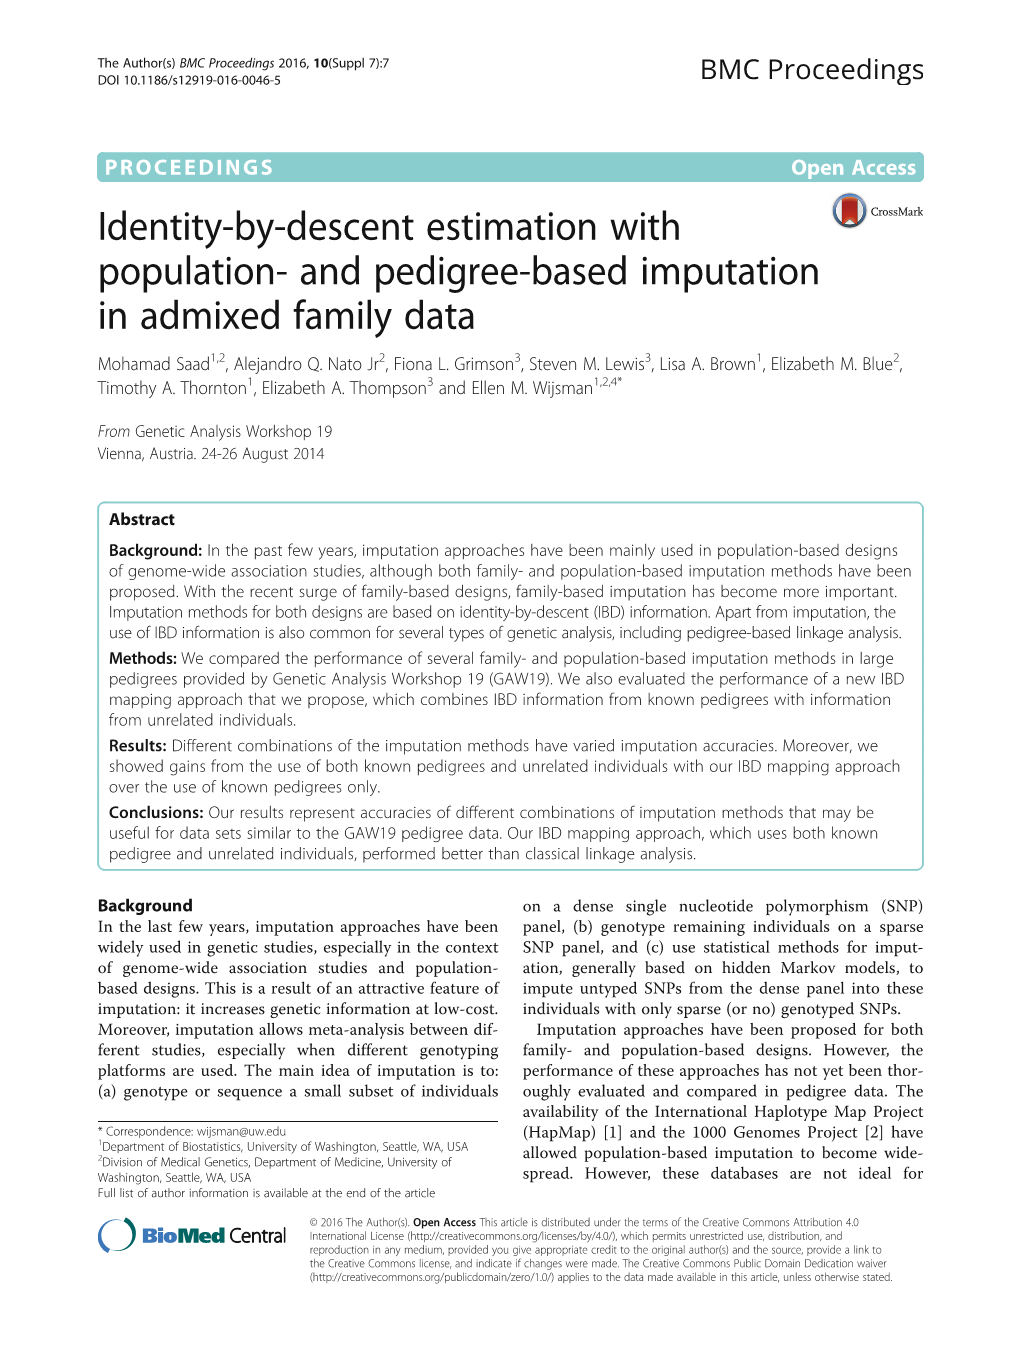 Identity-By-Descent Estimation with Population- and Pedigree-Based Imputation in Admixed Family Data Mohamad Saad1,2, Alejandro Q